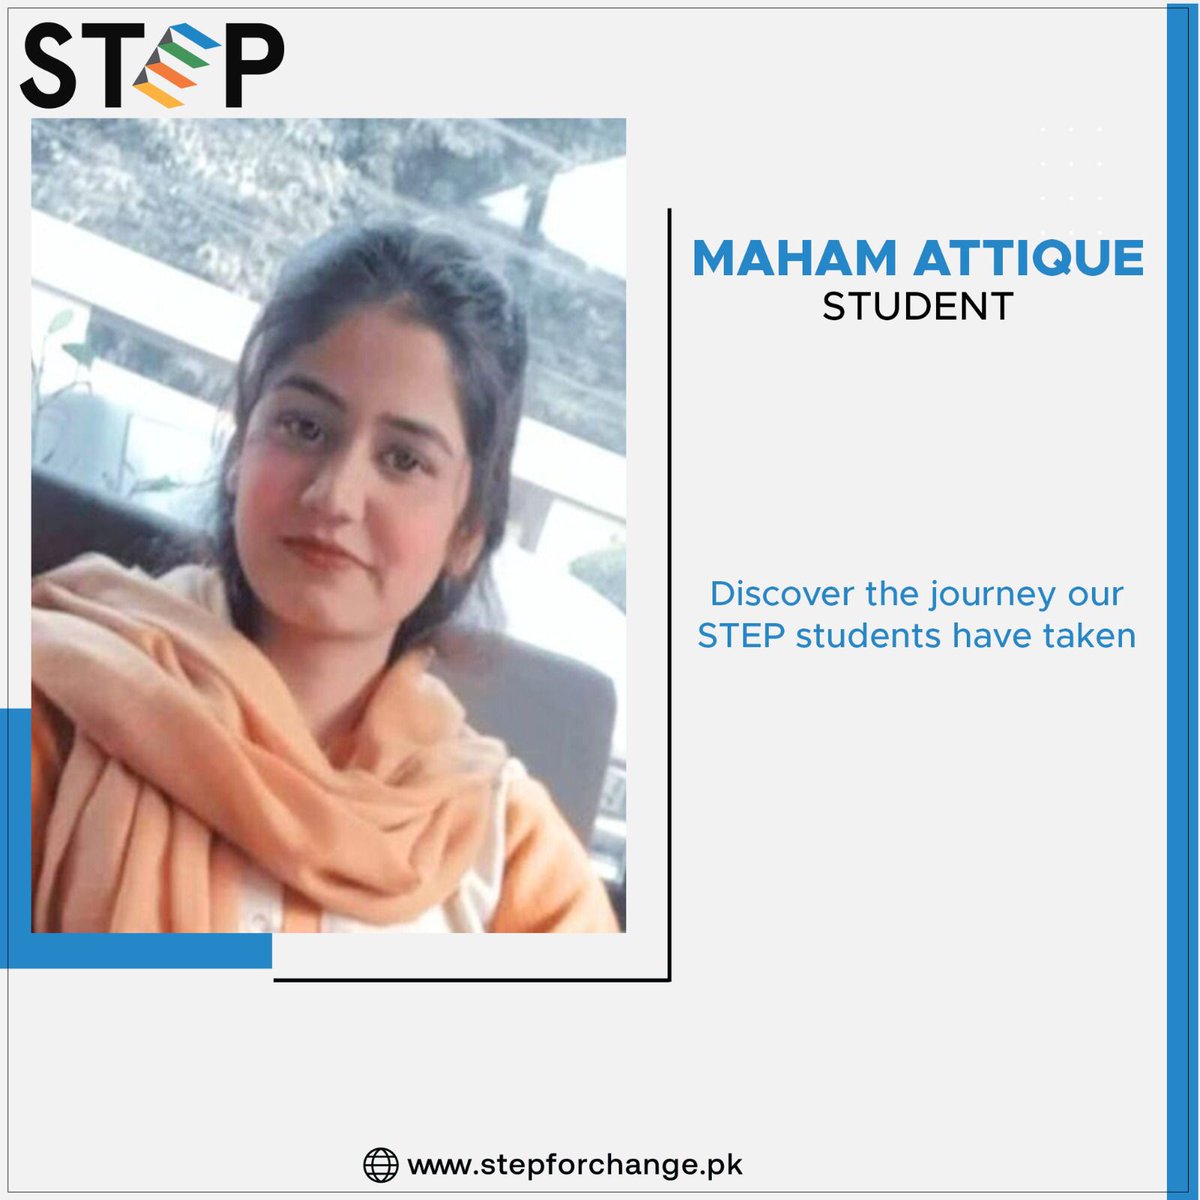 Maham Attique is an inspiring example of how hard work and dedication pay off! 

#sponsorskillsforstudents #stepprogram #skills #finalyear #Empowering #step #technicaltraining #nontechnicalskills